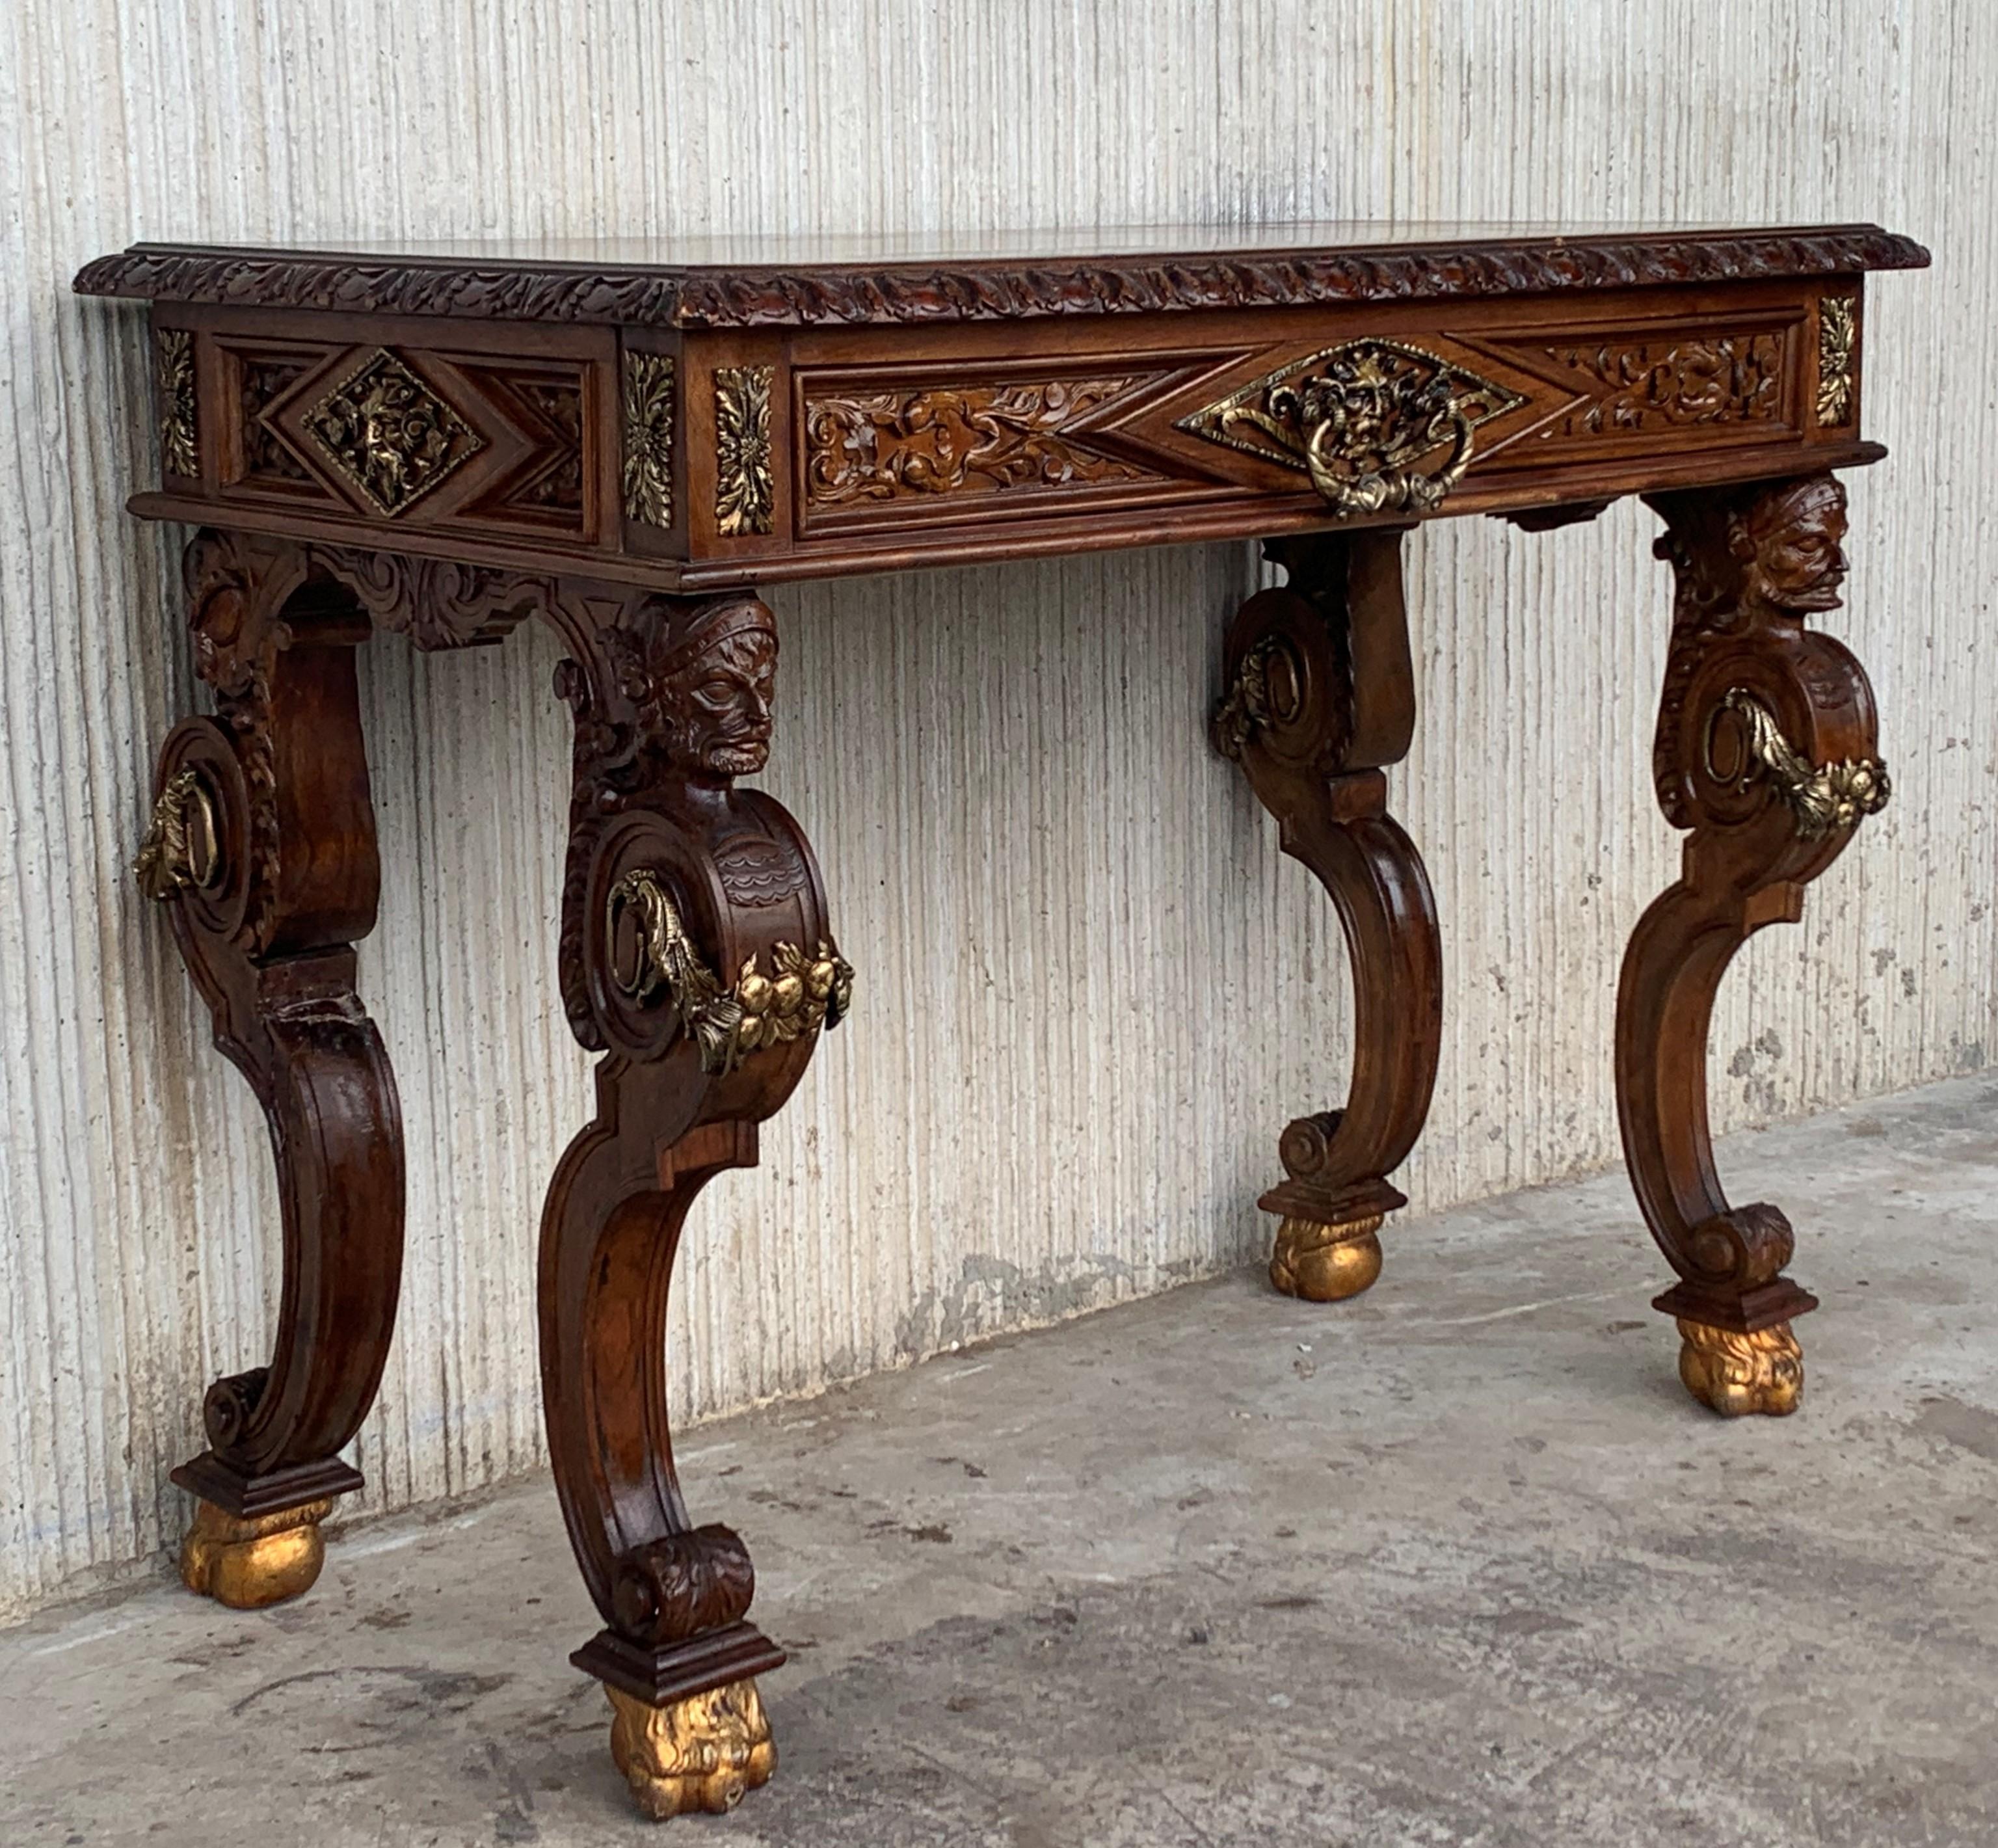 19th century Spanish Renaissance walnut writing table is a splendid example of the breed, with classical architecture enhanced by hand carved relief work in an abstract expression of the Renaissance style. Four carved columns depicting Sirs form the